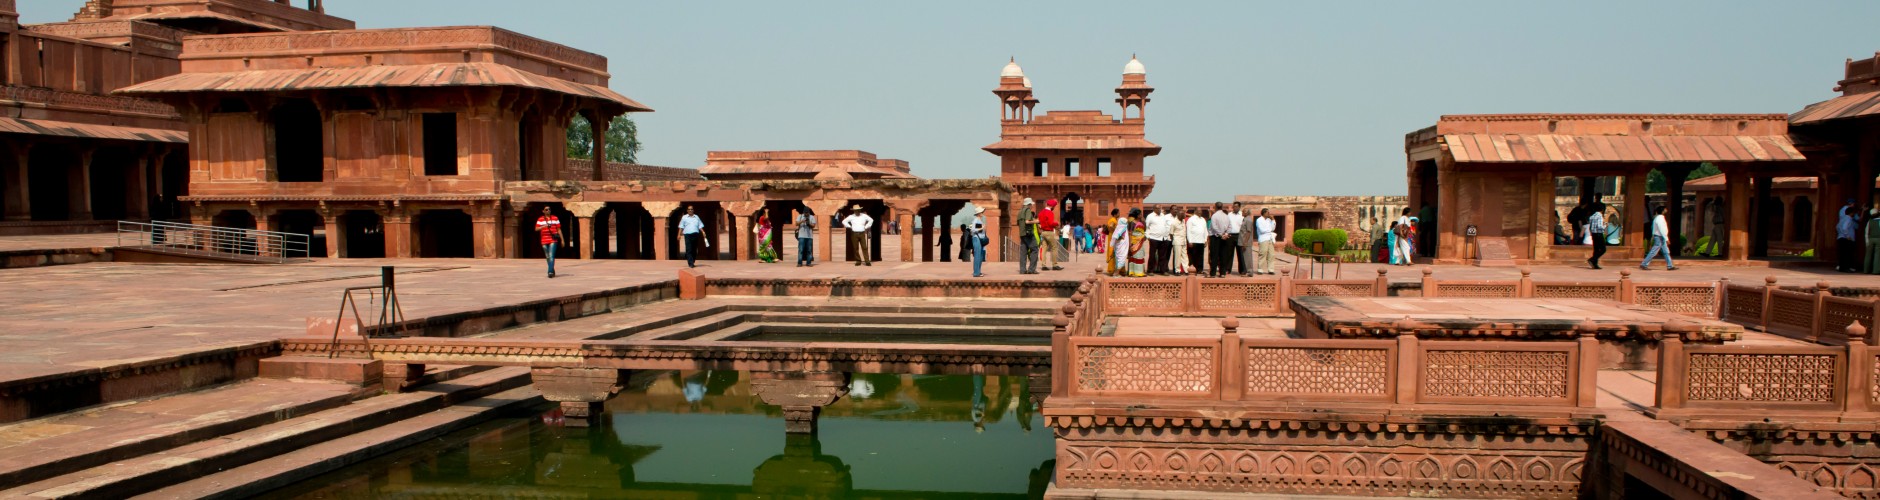 Side View Of fatehpur sikri fort